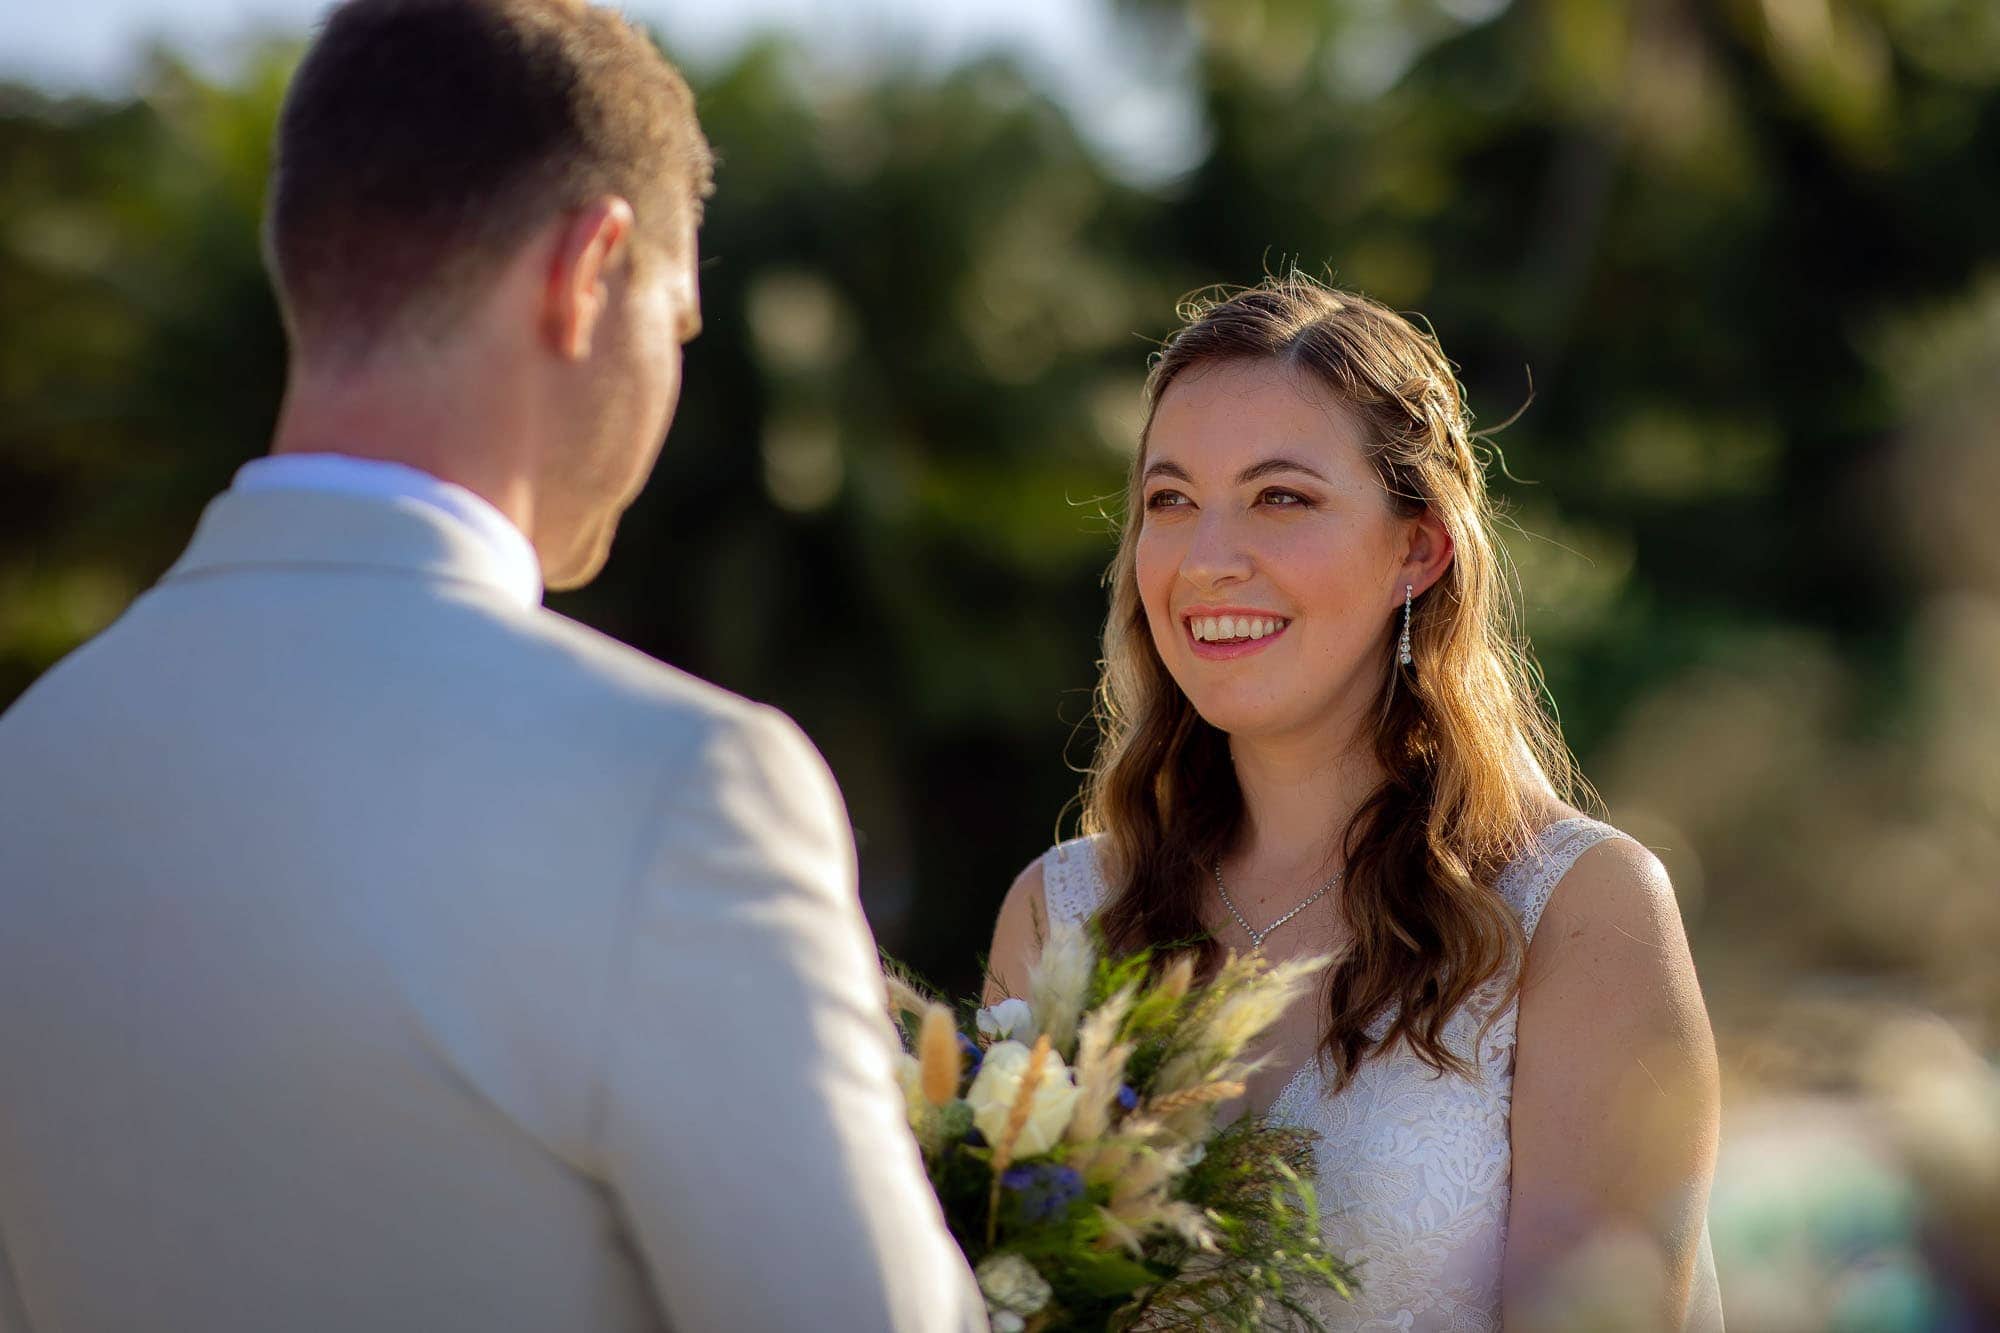 the smile on the bride's face during the ceremony